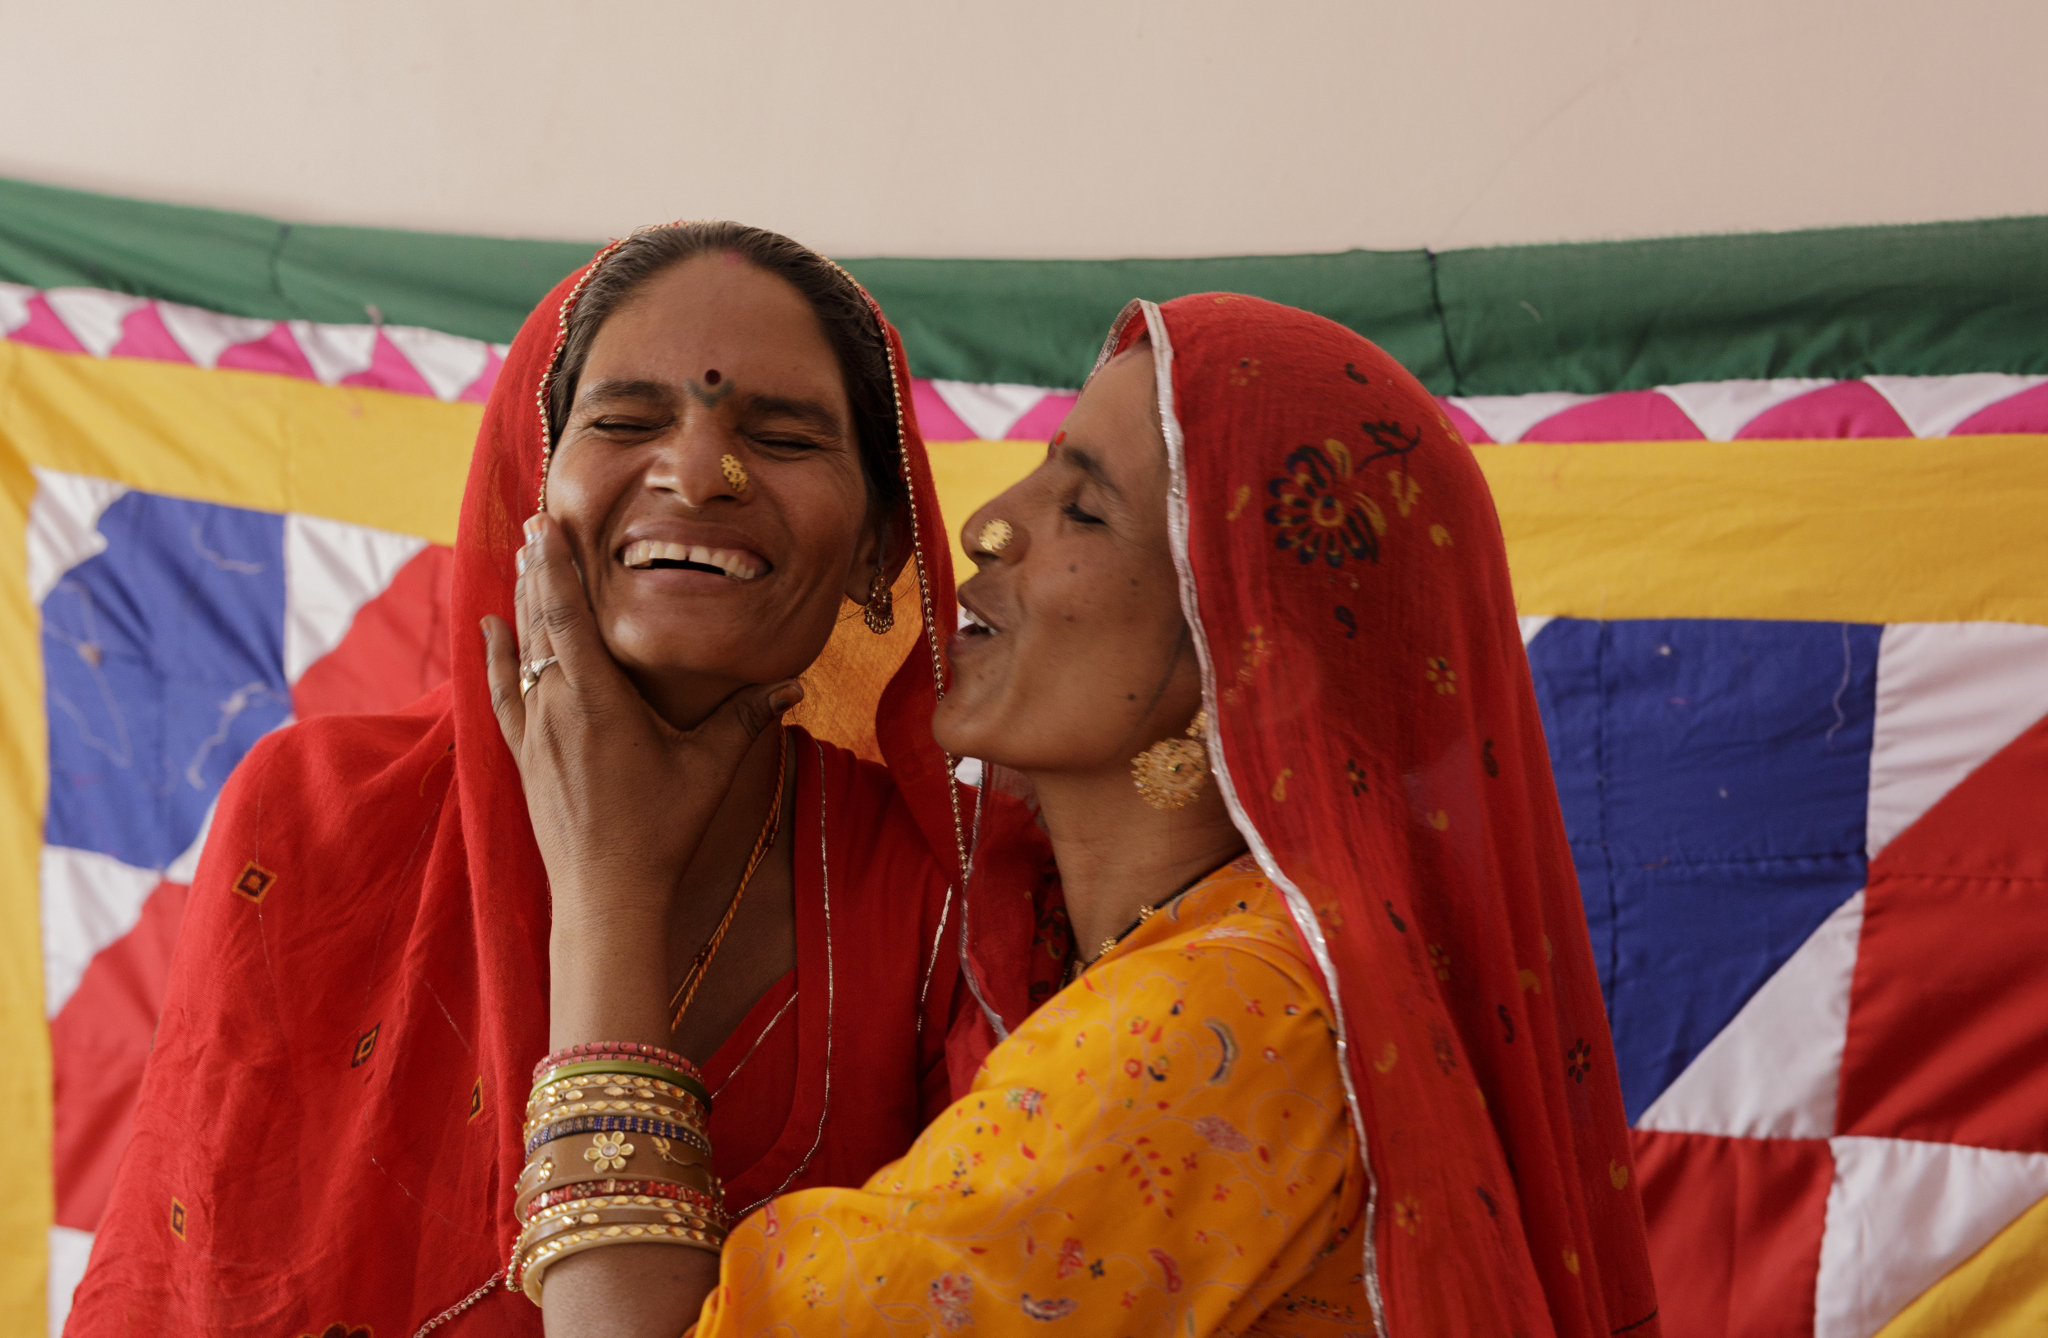 "Two Saheli Women artisans expressing love and support through a heartfelt kiss, symbolizing the bonds of solidarity and empowerment among women."